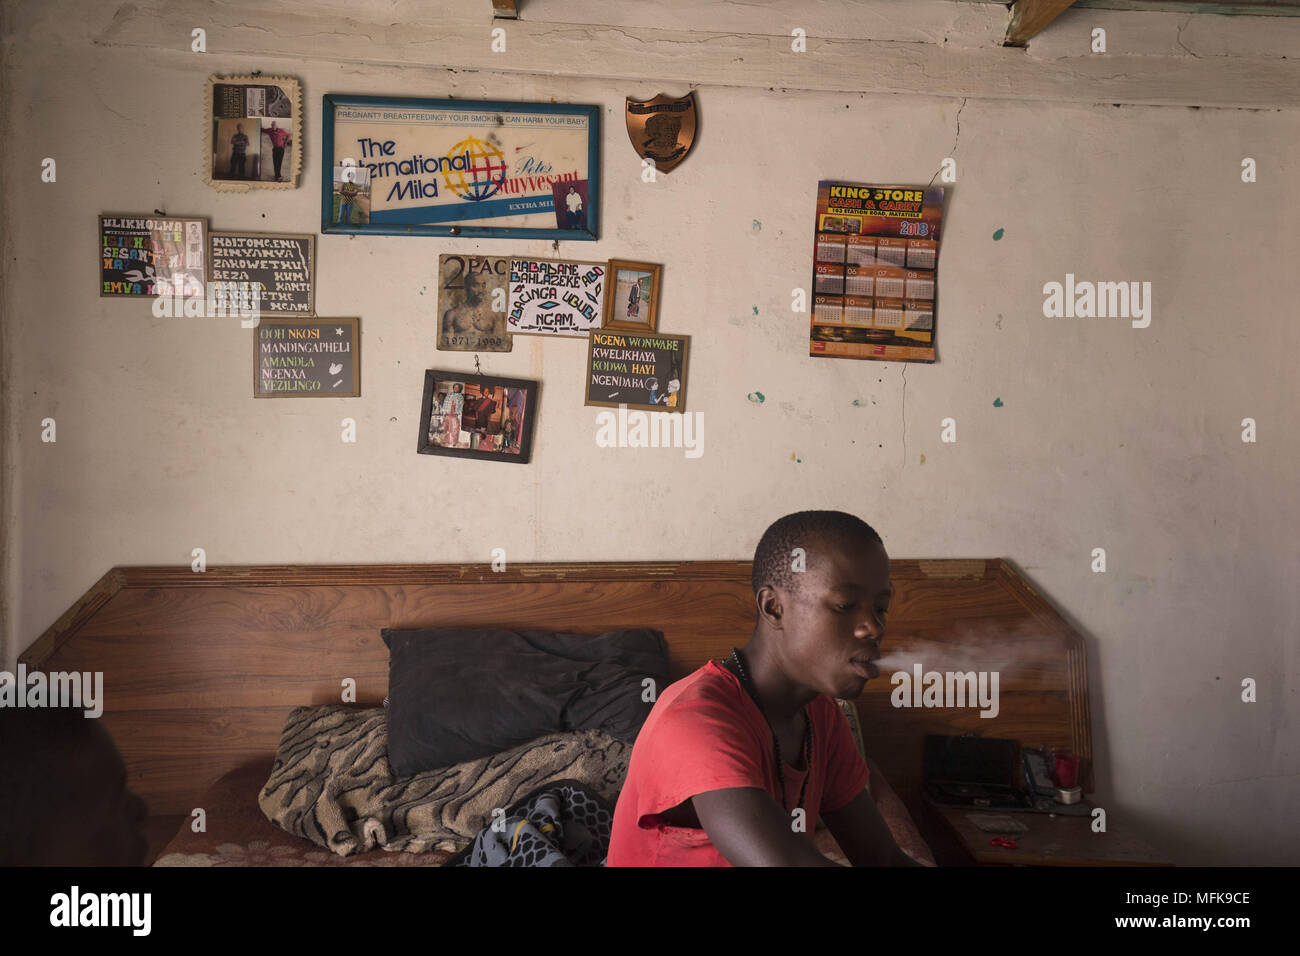 January 12, 2018 - Matatiele, Eastern Cape, South Africa - Jake, 23, sits on his bed and smokes cannabis. He says: 'I have nothing to do all day. I have finished school, but for what? There are no jobs. I am bored, and if I stay at home all day I would become crazy. To keep myself busy I wake up in the morning, then go to town and push people's trollies outside the Spar supermarket. Then I come back home to the village and sell cannabis, and hang out with my friends. I want to find a job and do something meaningful with my life. But there is nothing. You have to be very lucky to find a job aro Stock Photo